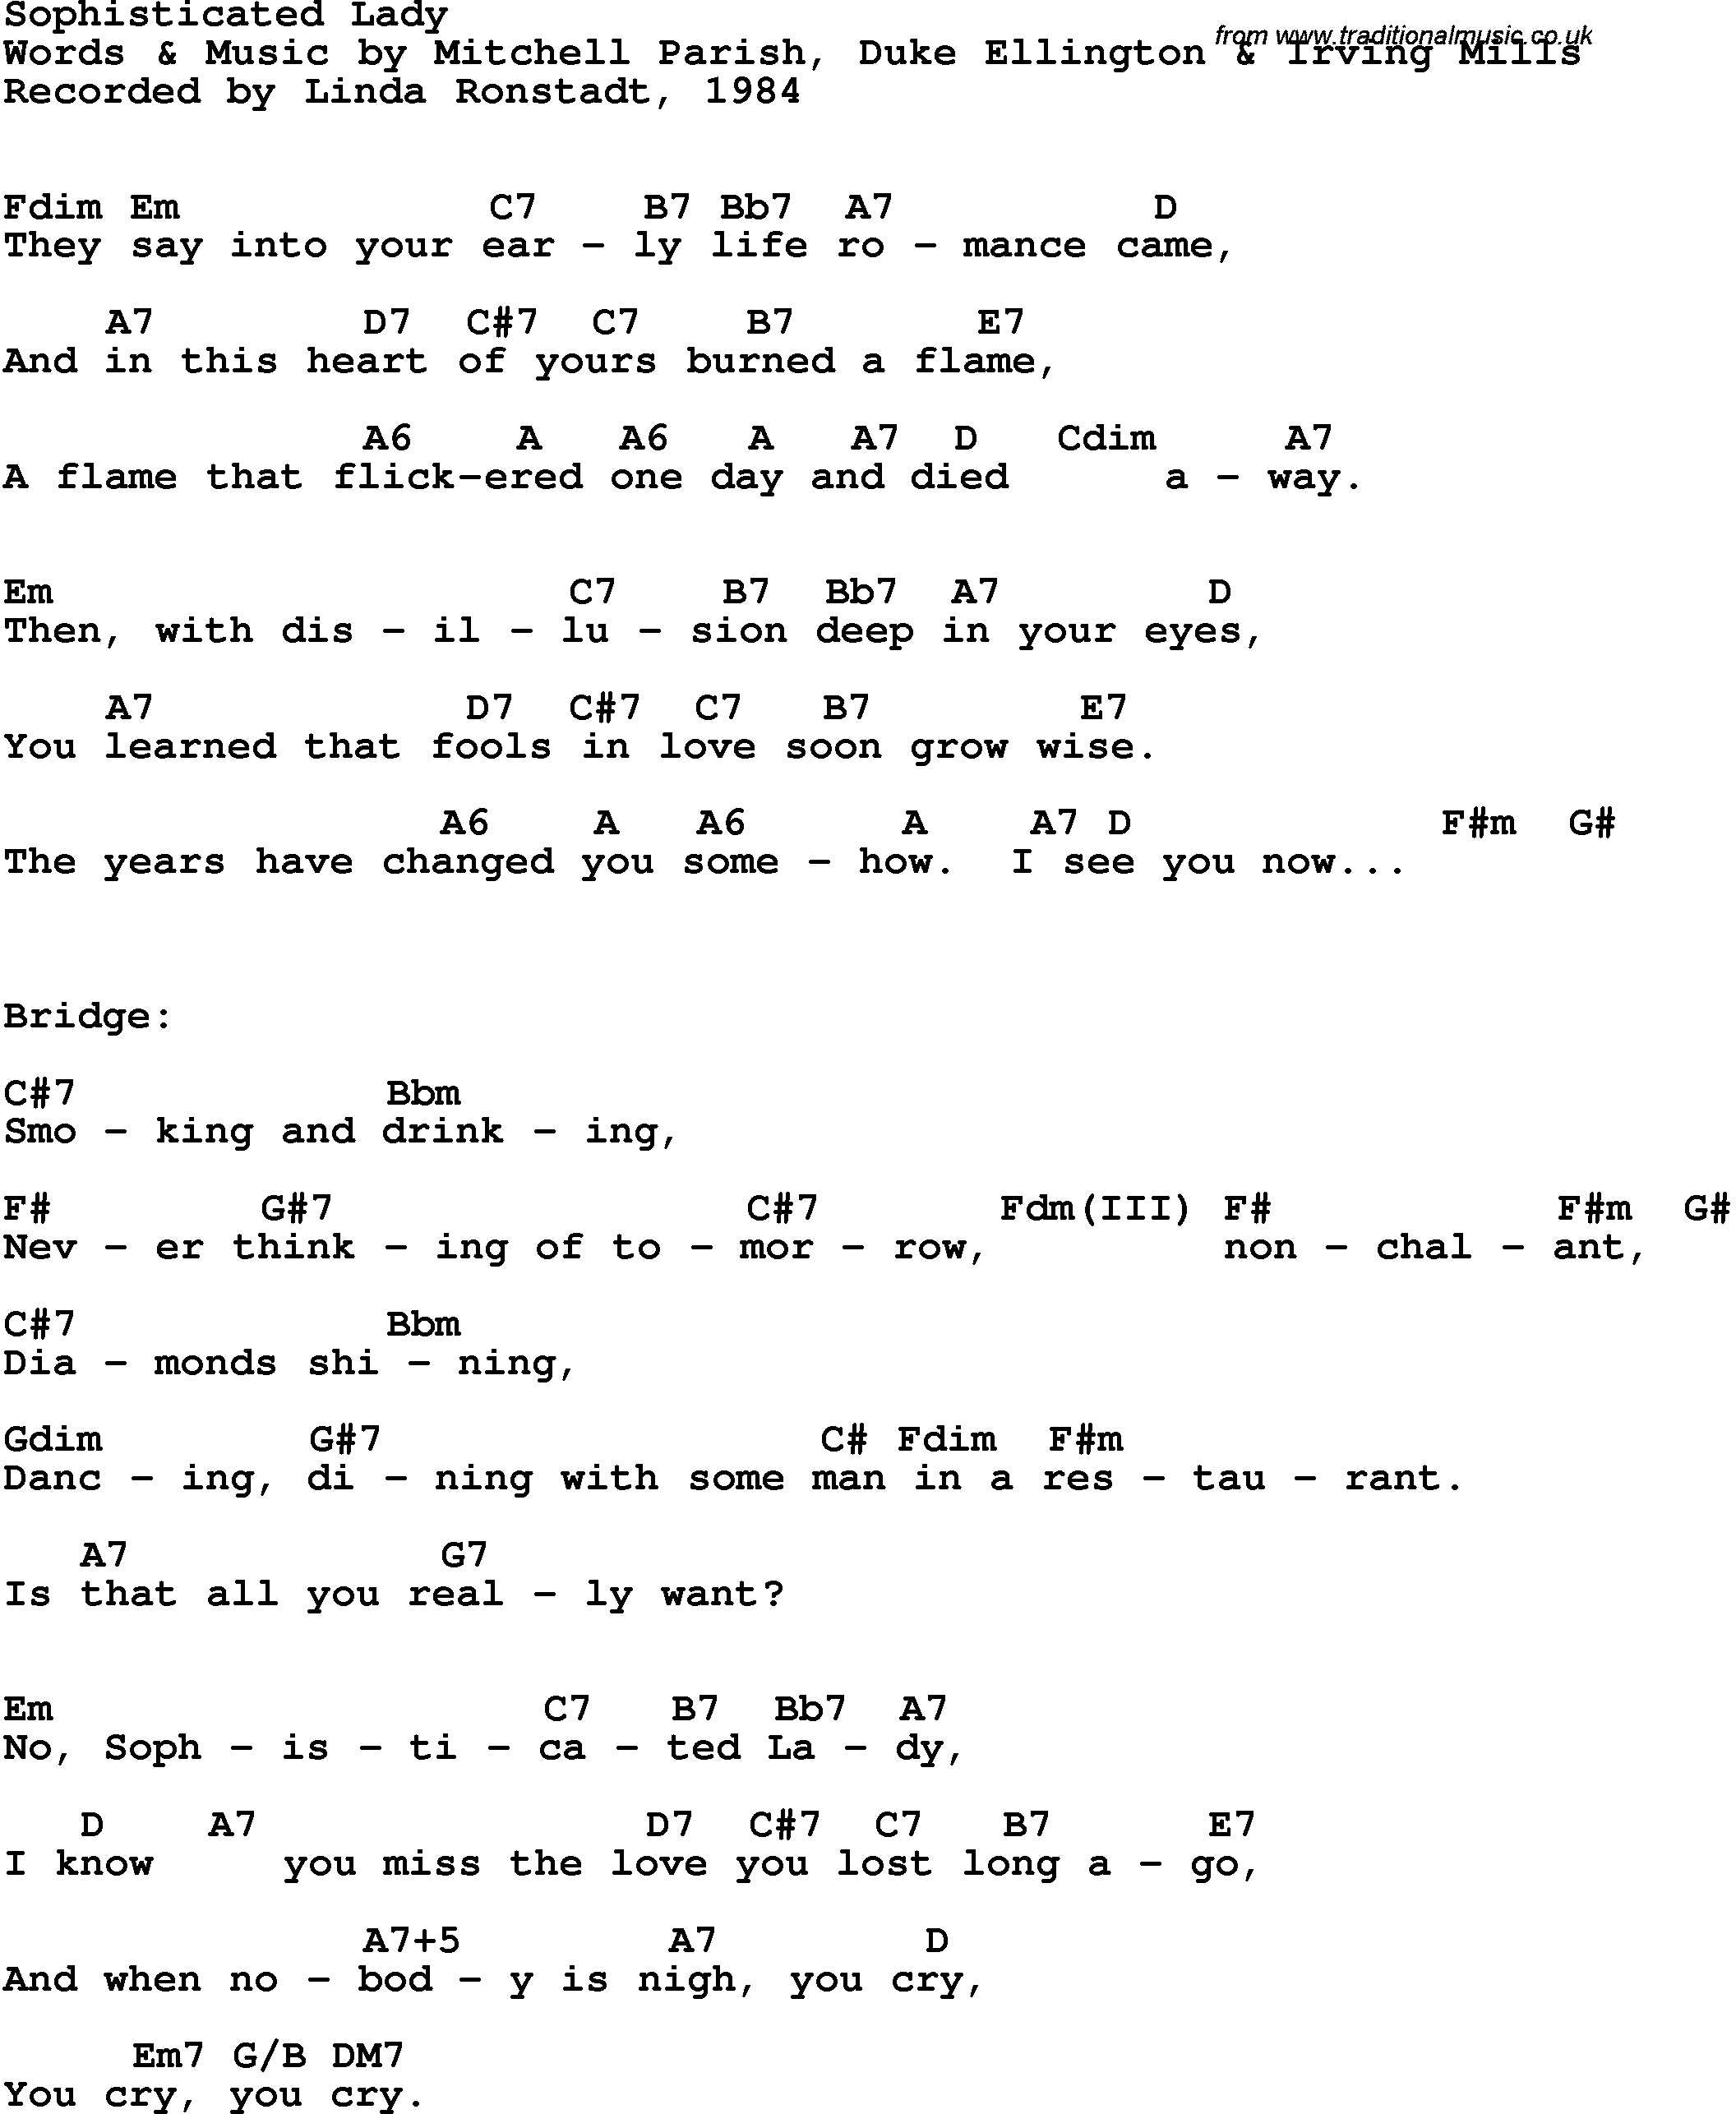 Song Lyrics with guitar chords for Sophisticated Lady - Linda Ronstadt, 1984